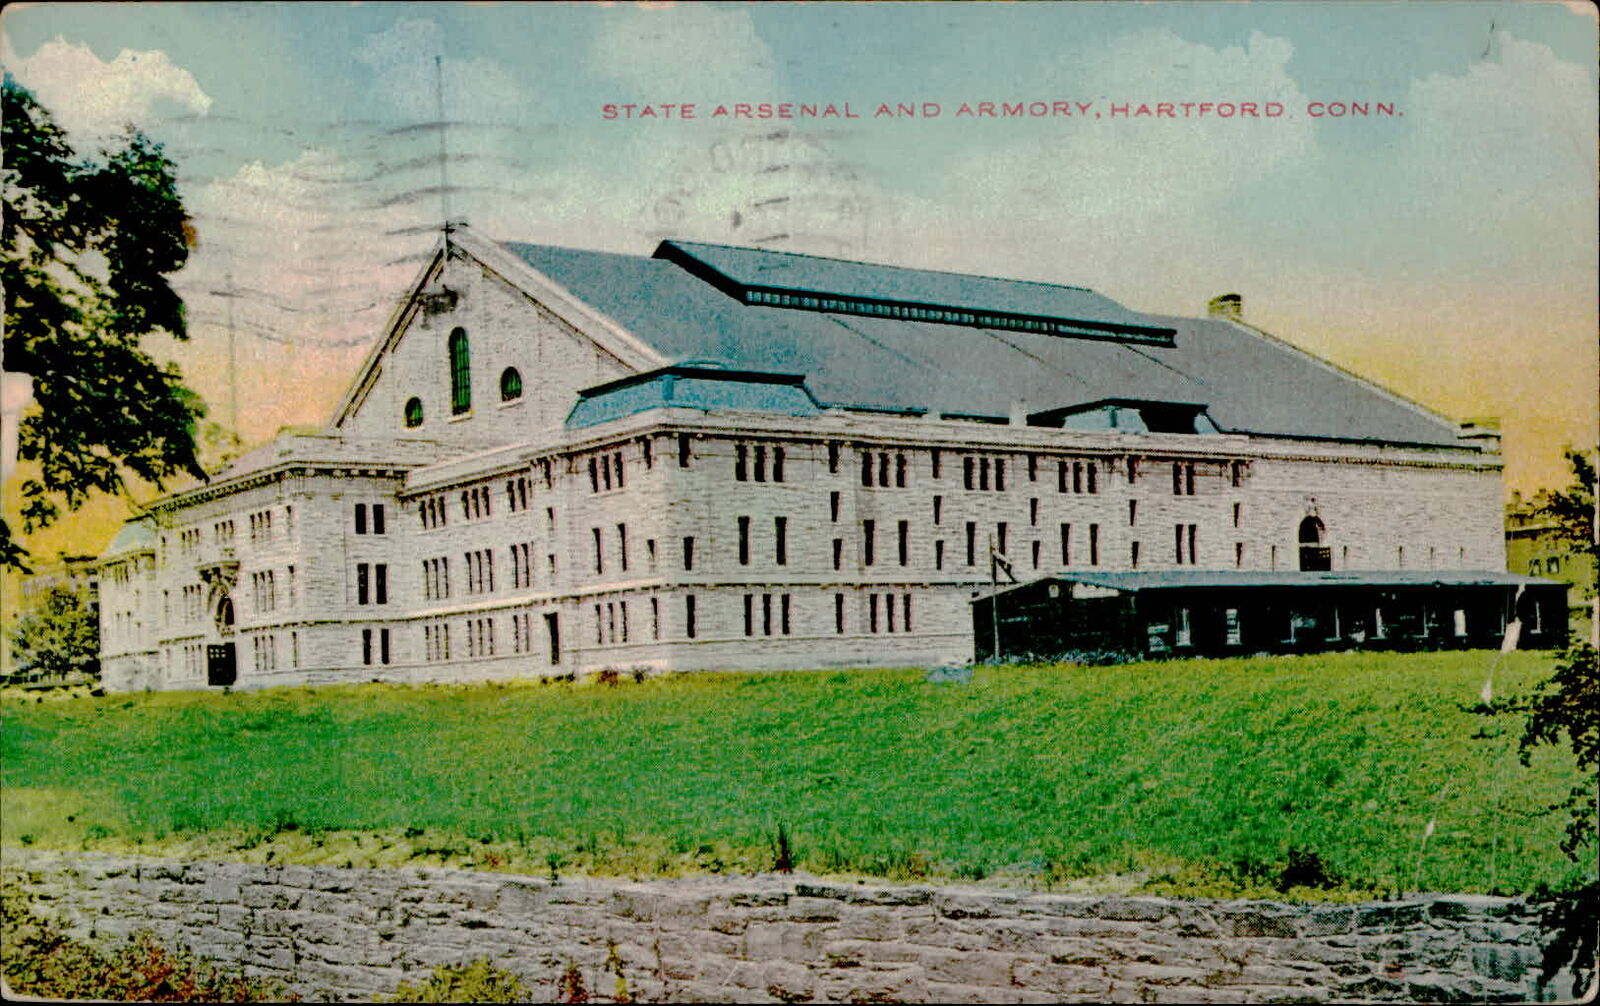 Postcard: STATE ARSENAL AND ARMORY, HARTFORD CONN